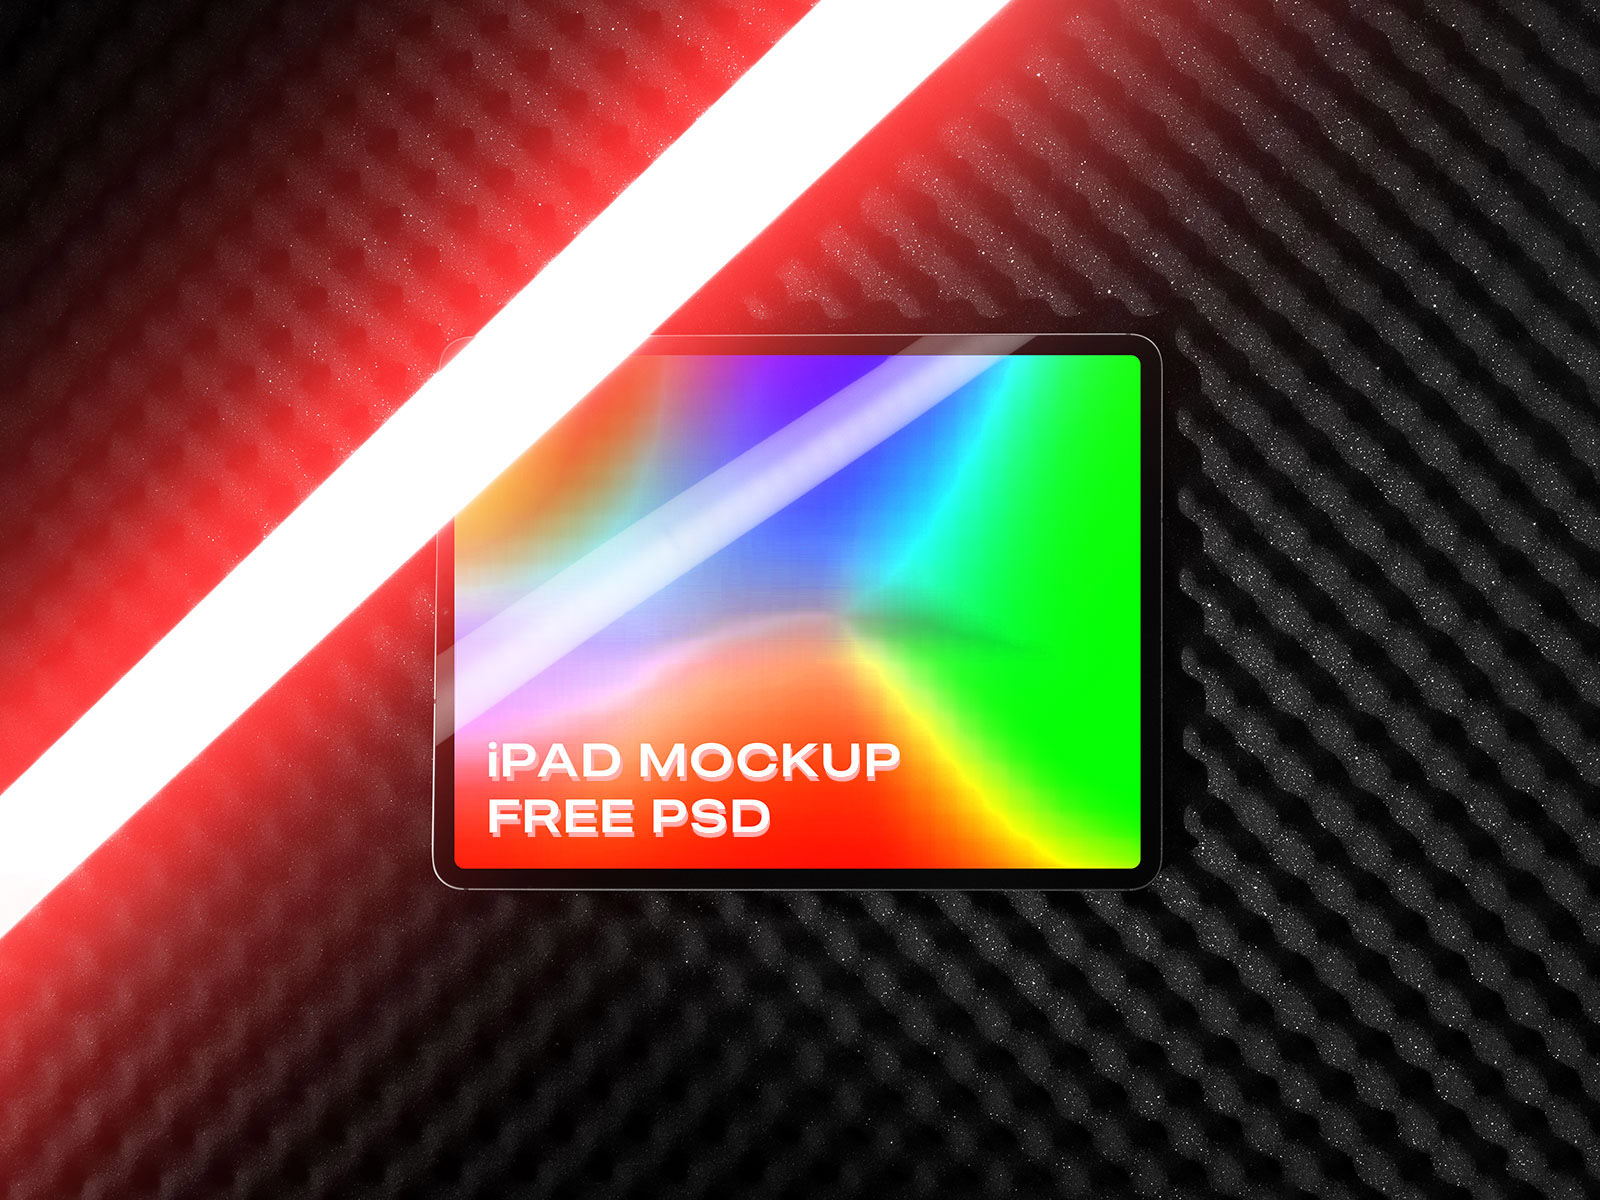 iPad Pro Mockup with Fluorescent Lamp Reflections